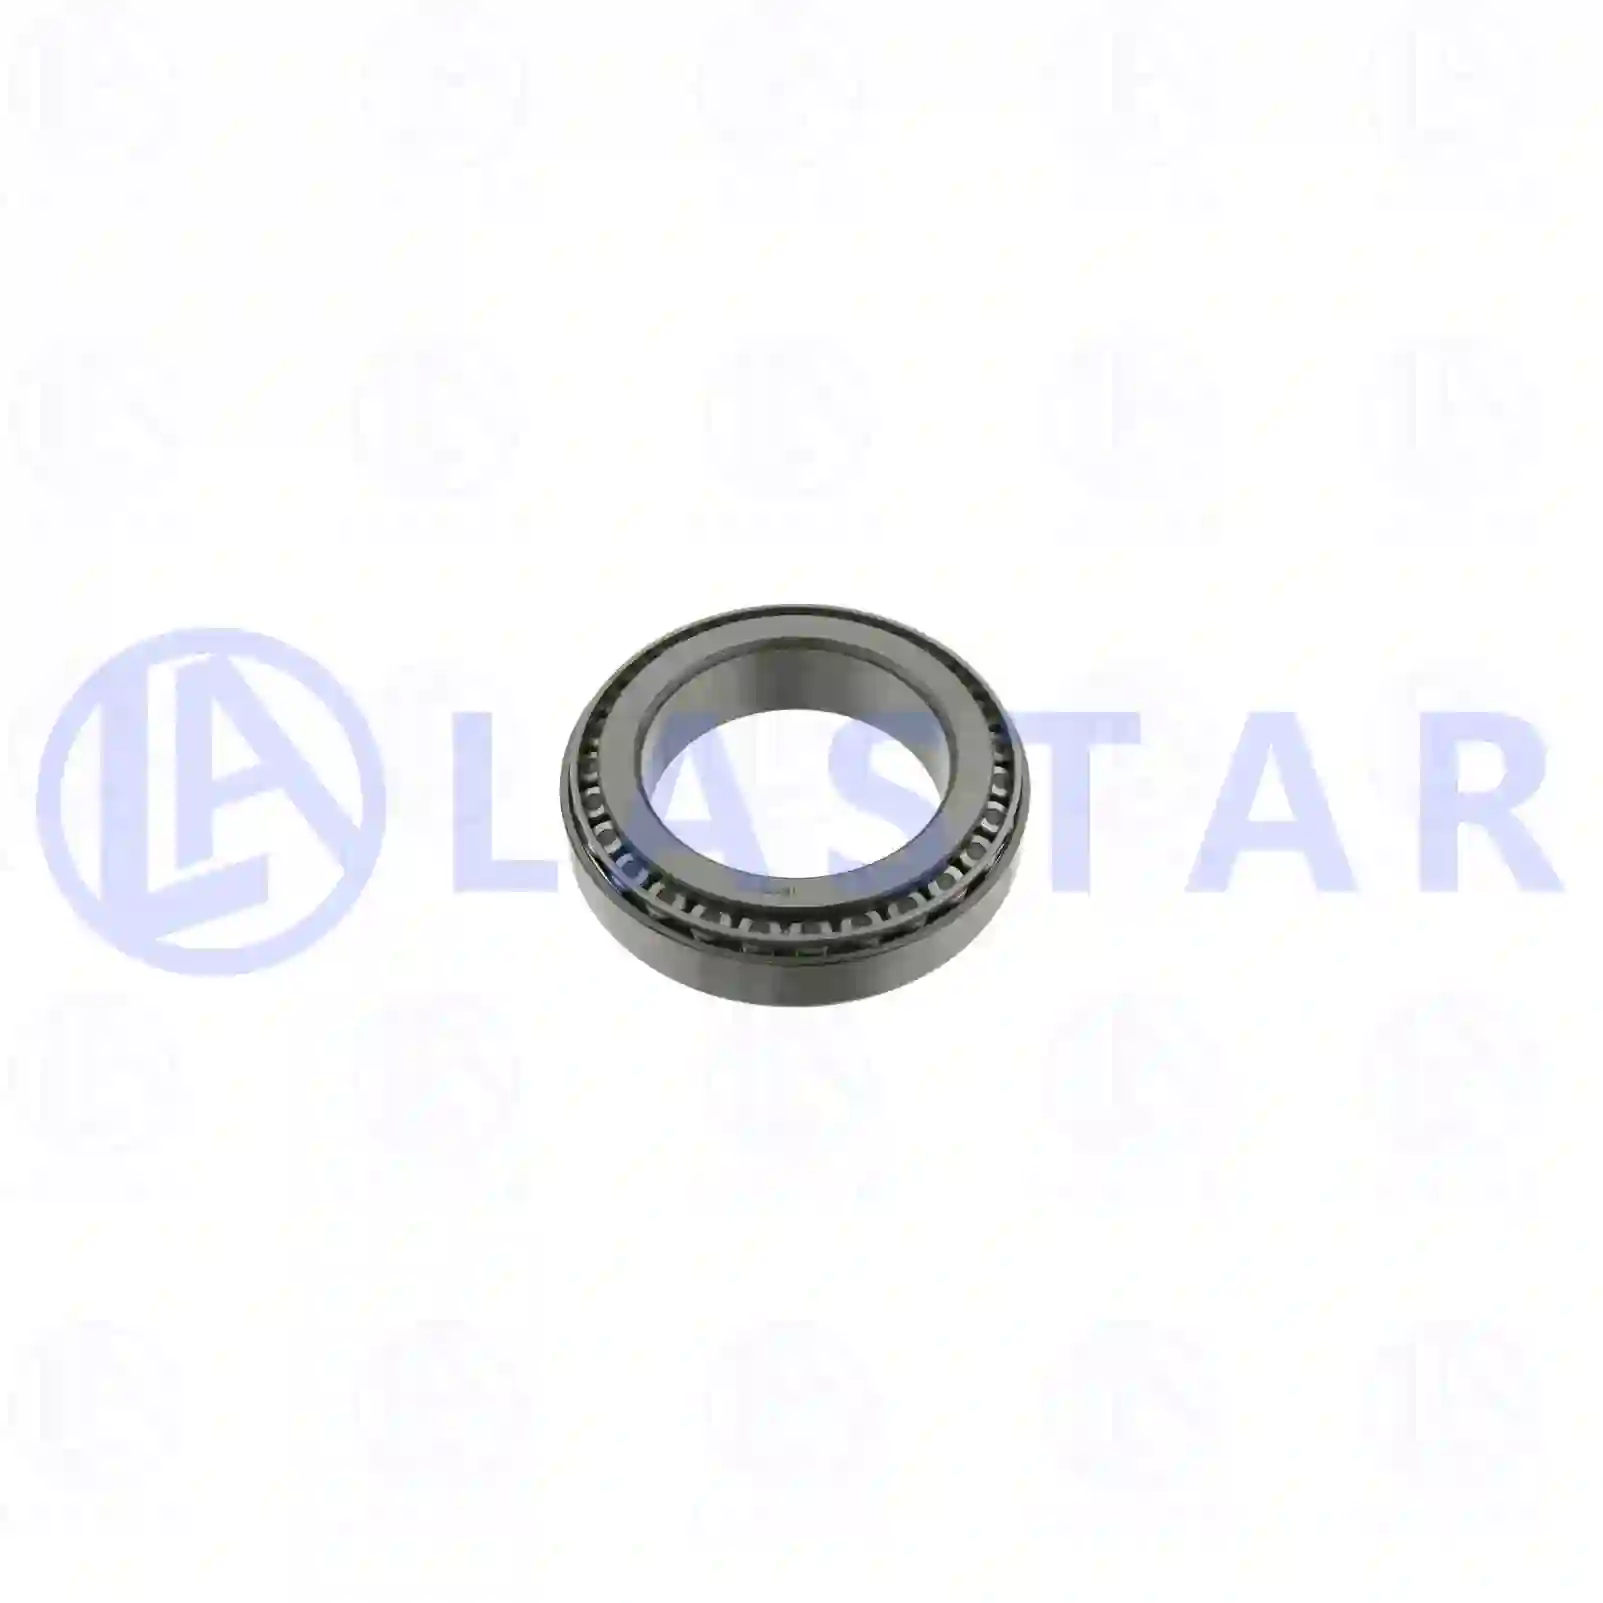 Rear Axle, Complete Tapered roller bearing, la no: 77730371 ,  oem no:1453936, 01101856, 000720900000, 0029815005, 0029815305, 0059819005, 0079810205, 0179818105, 5001014916, 264960, 351715, 362226, 6691450000, ZG02970-0008 Lastar Spare Part | Truck Spare Parts, Auotomotive Spare Parts